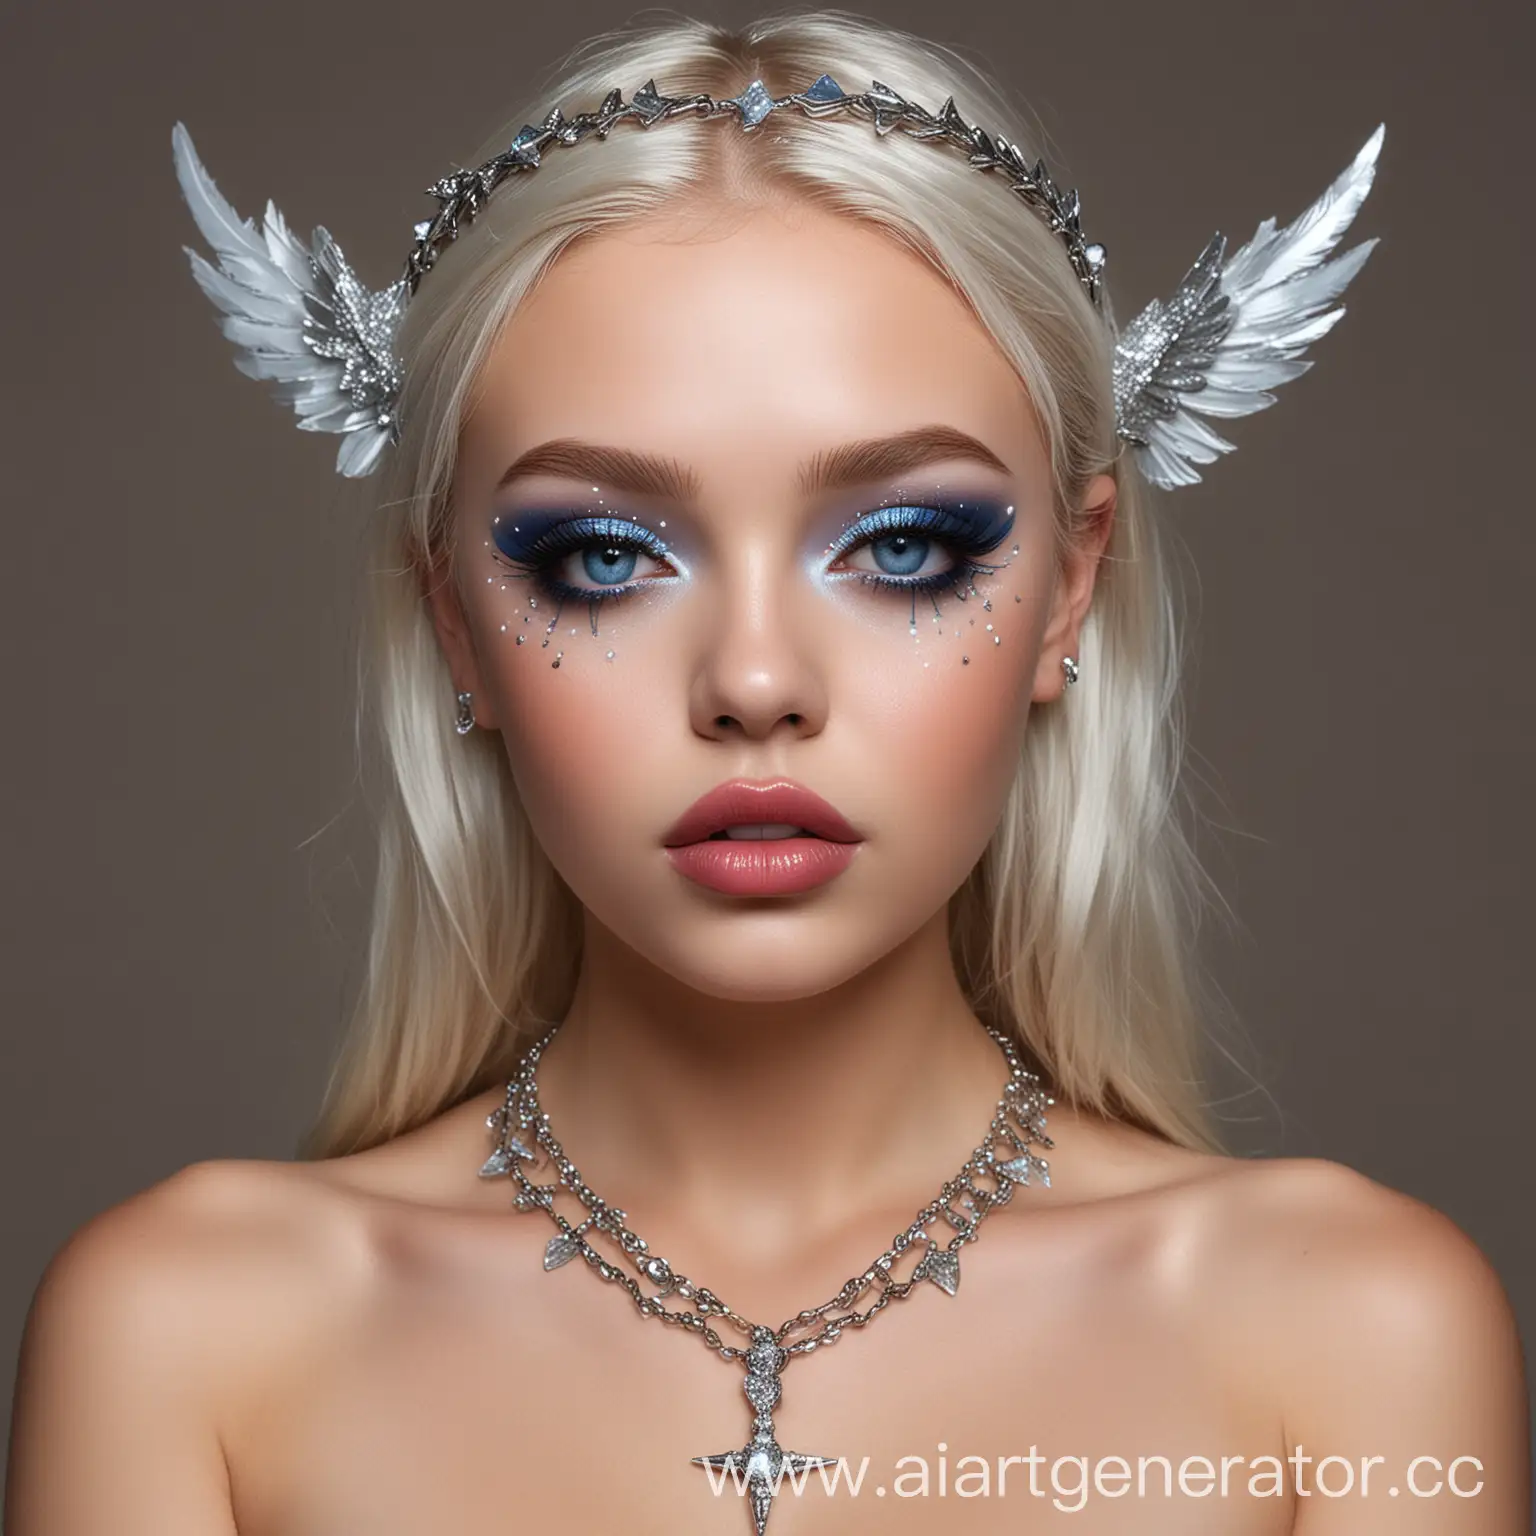 Sensual-Angel-with-Diamond-Necklace-Ethereal-Beauty-in-a-Glimmering-Chain